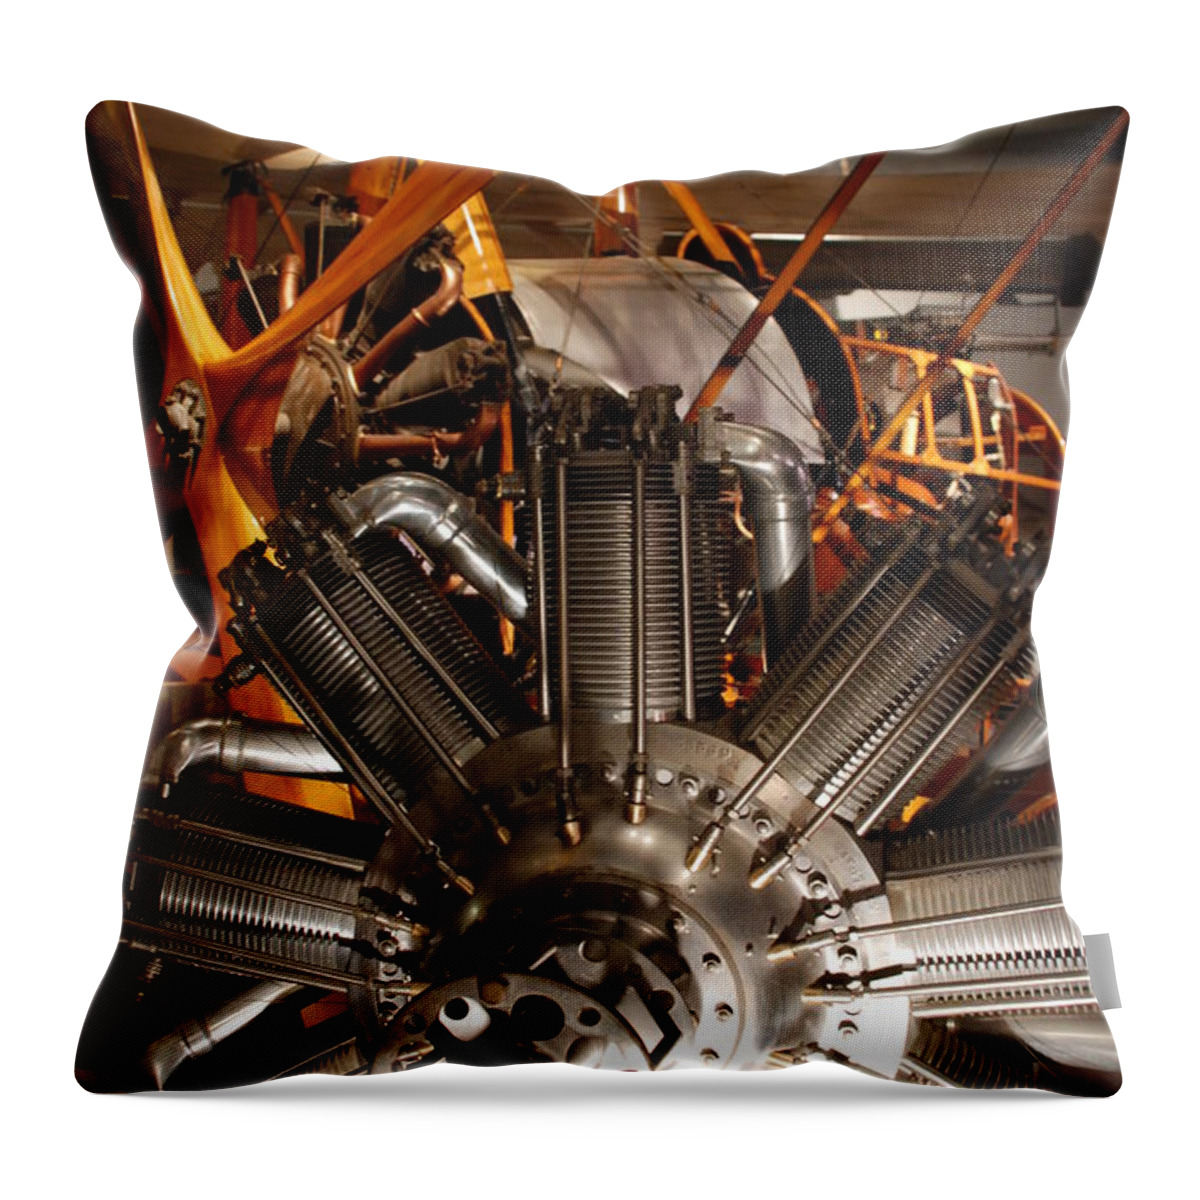 Planes Throw Pillow featuring the photograph Prop Plane Engine Illuminated by Kenny Glover